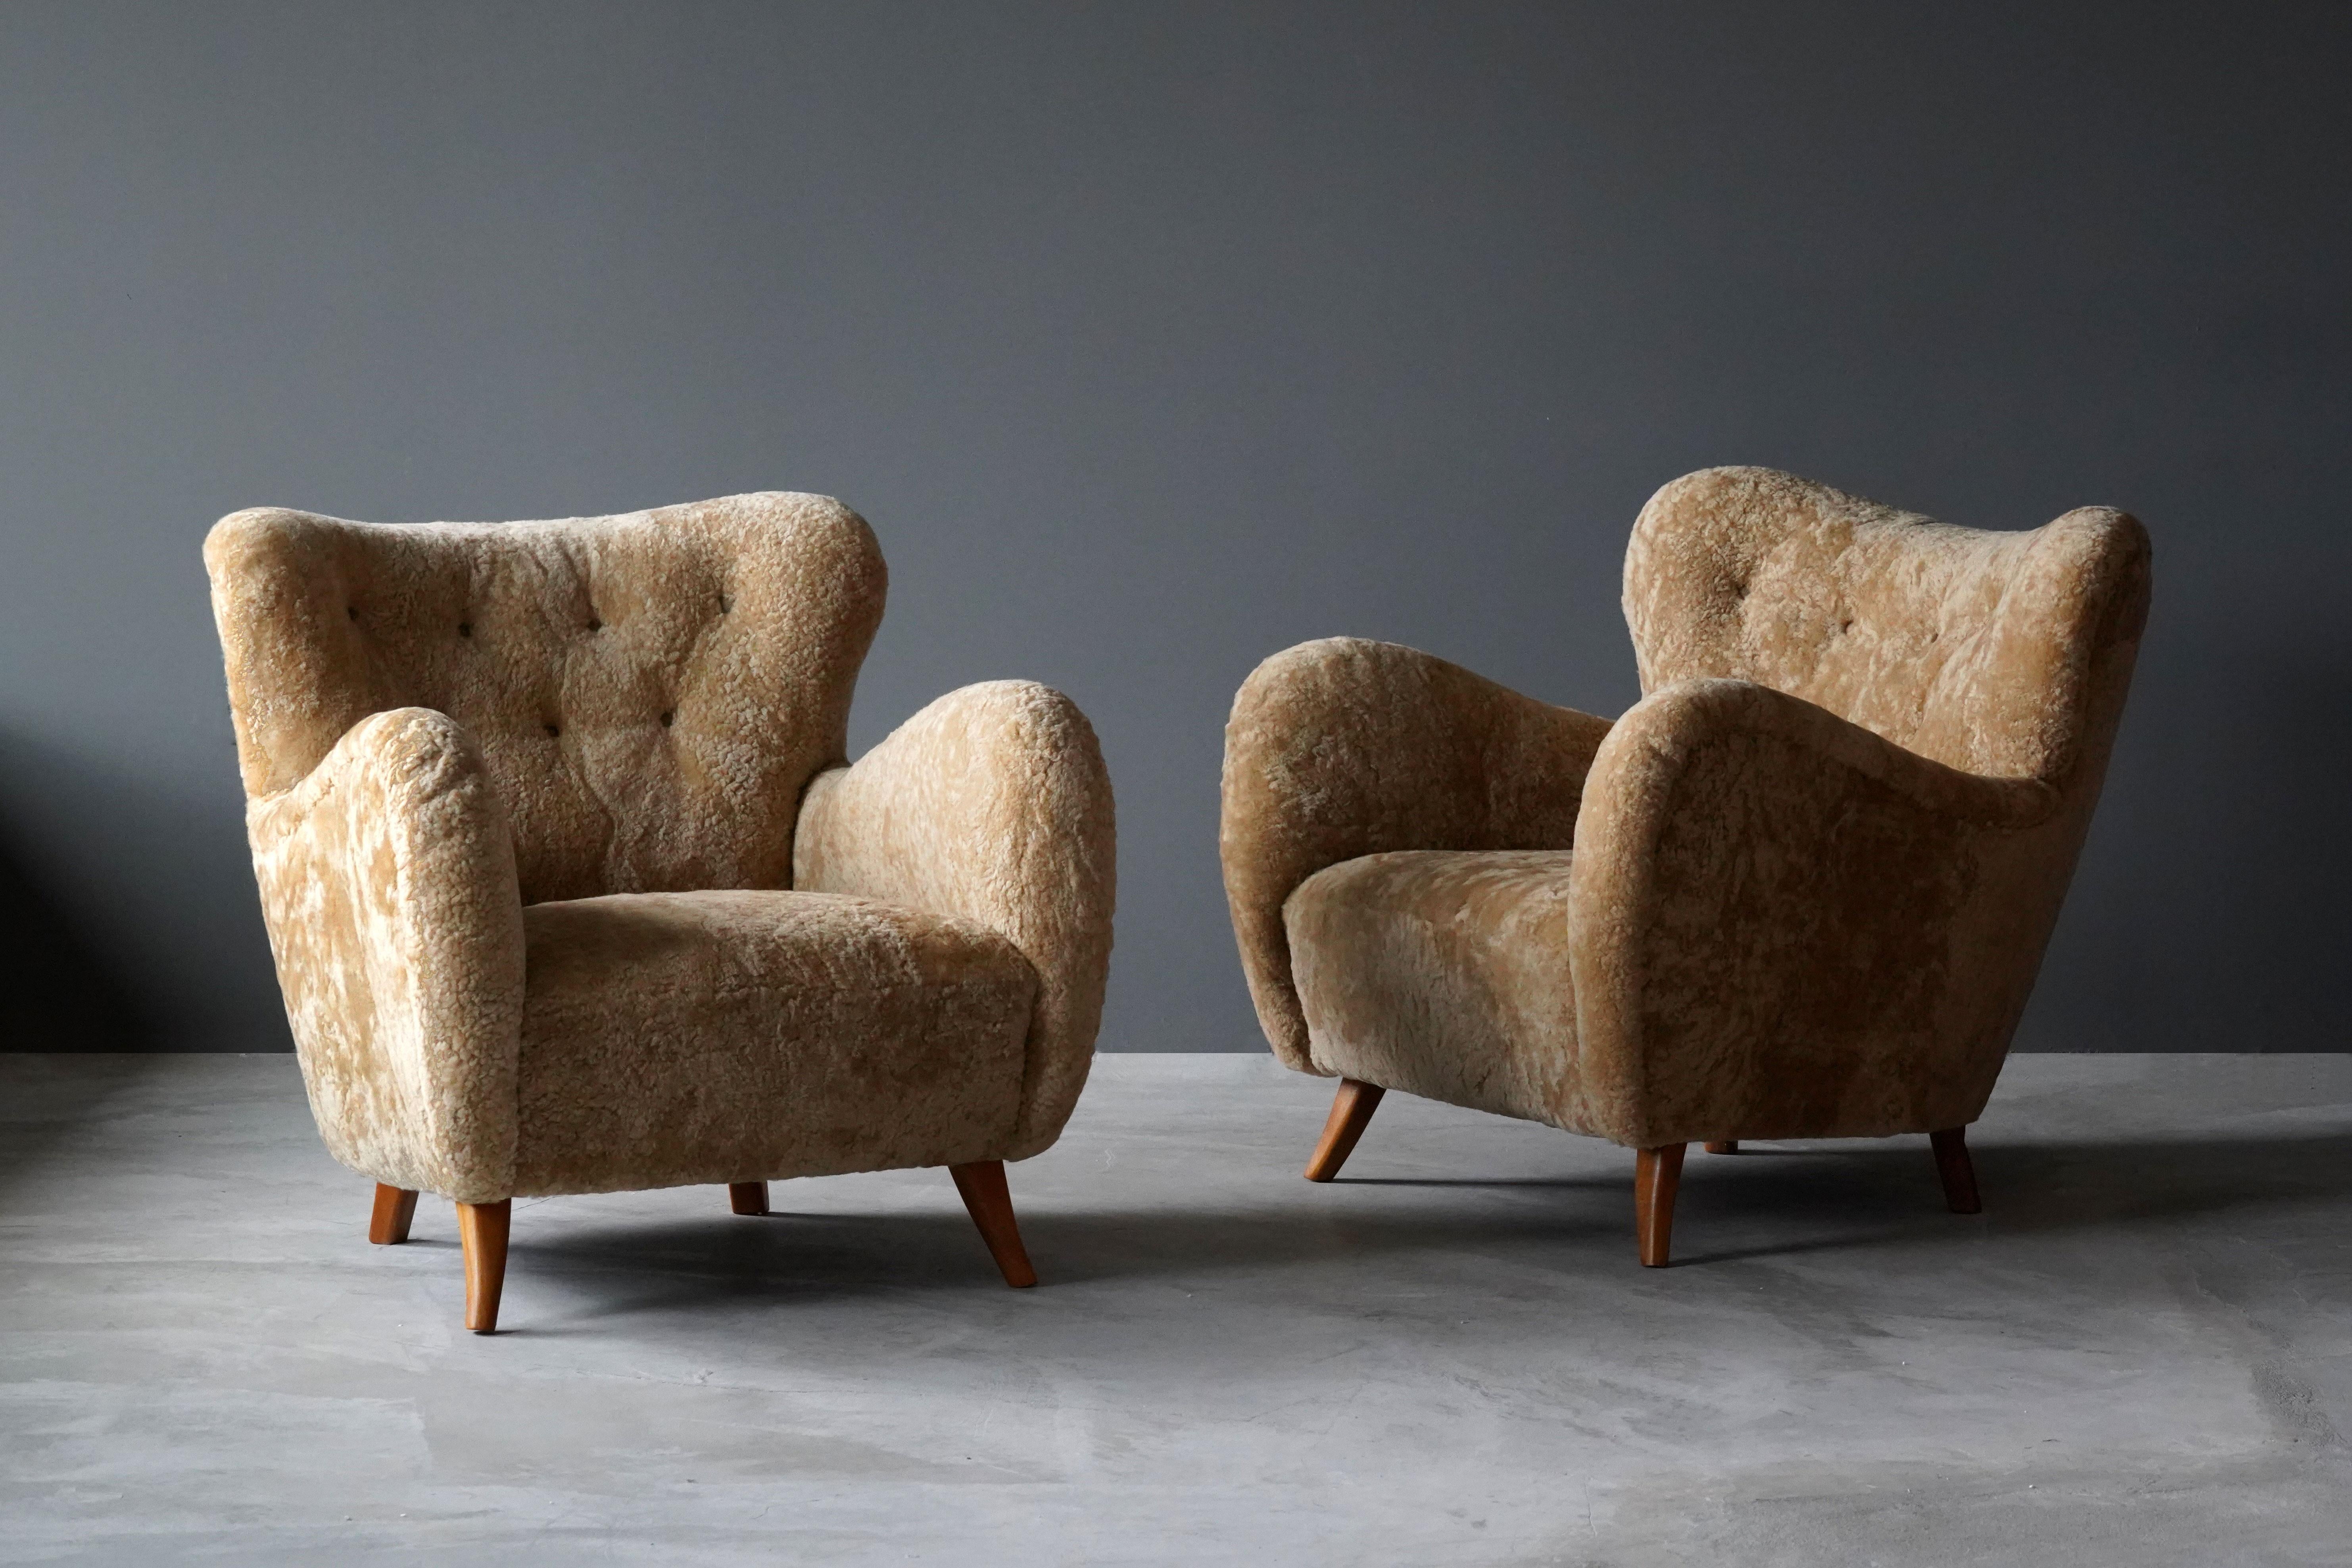 A pair of organic and highly modernist lounge chairs. Produced in Denmark, 1940s. Upholstered in brand new authentic sheepskin. Design attributed to modernist architect Frits Schlegel (Danish 1896-1965)

Other designers working in the organic